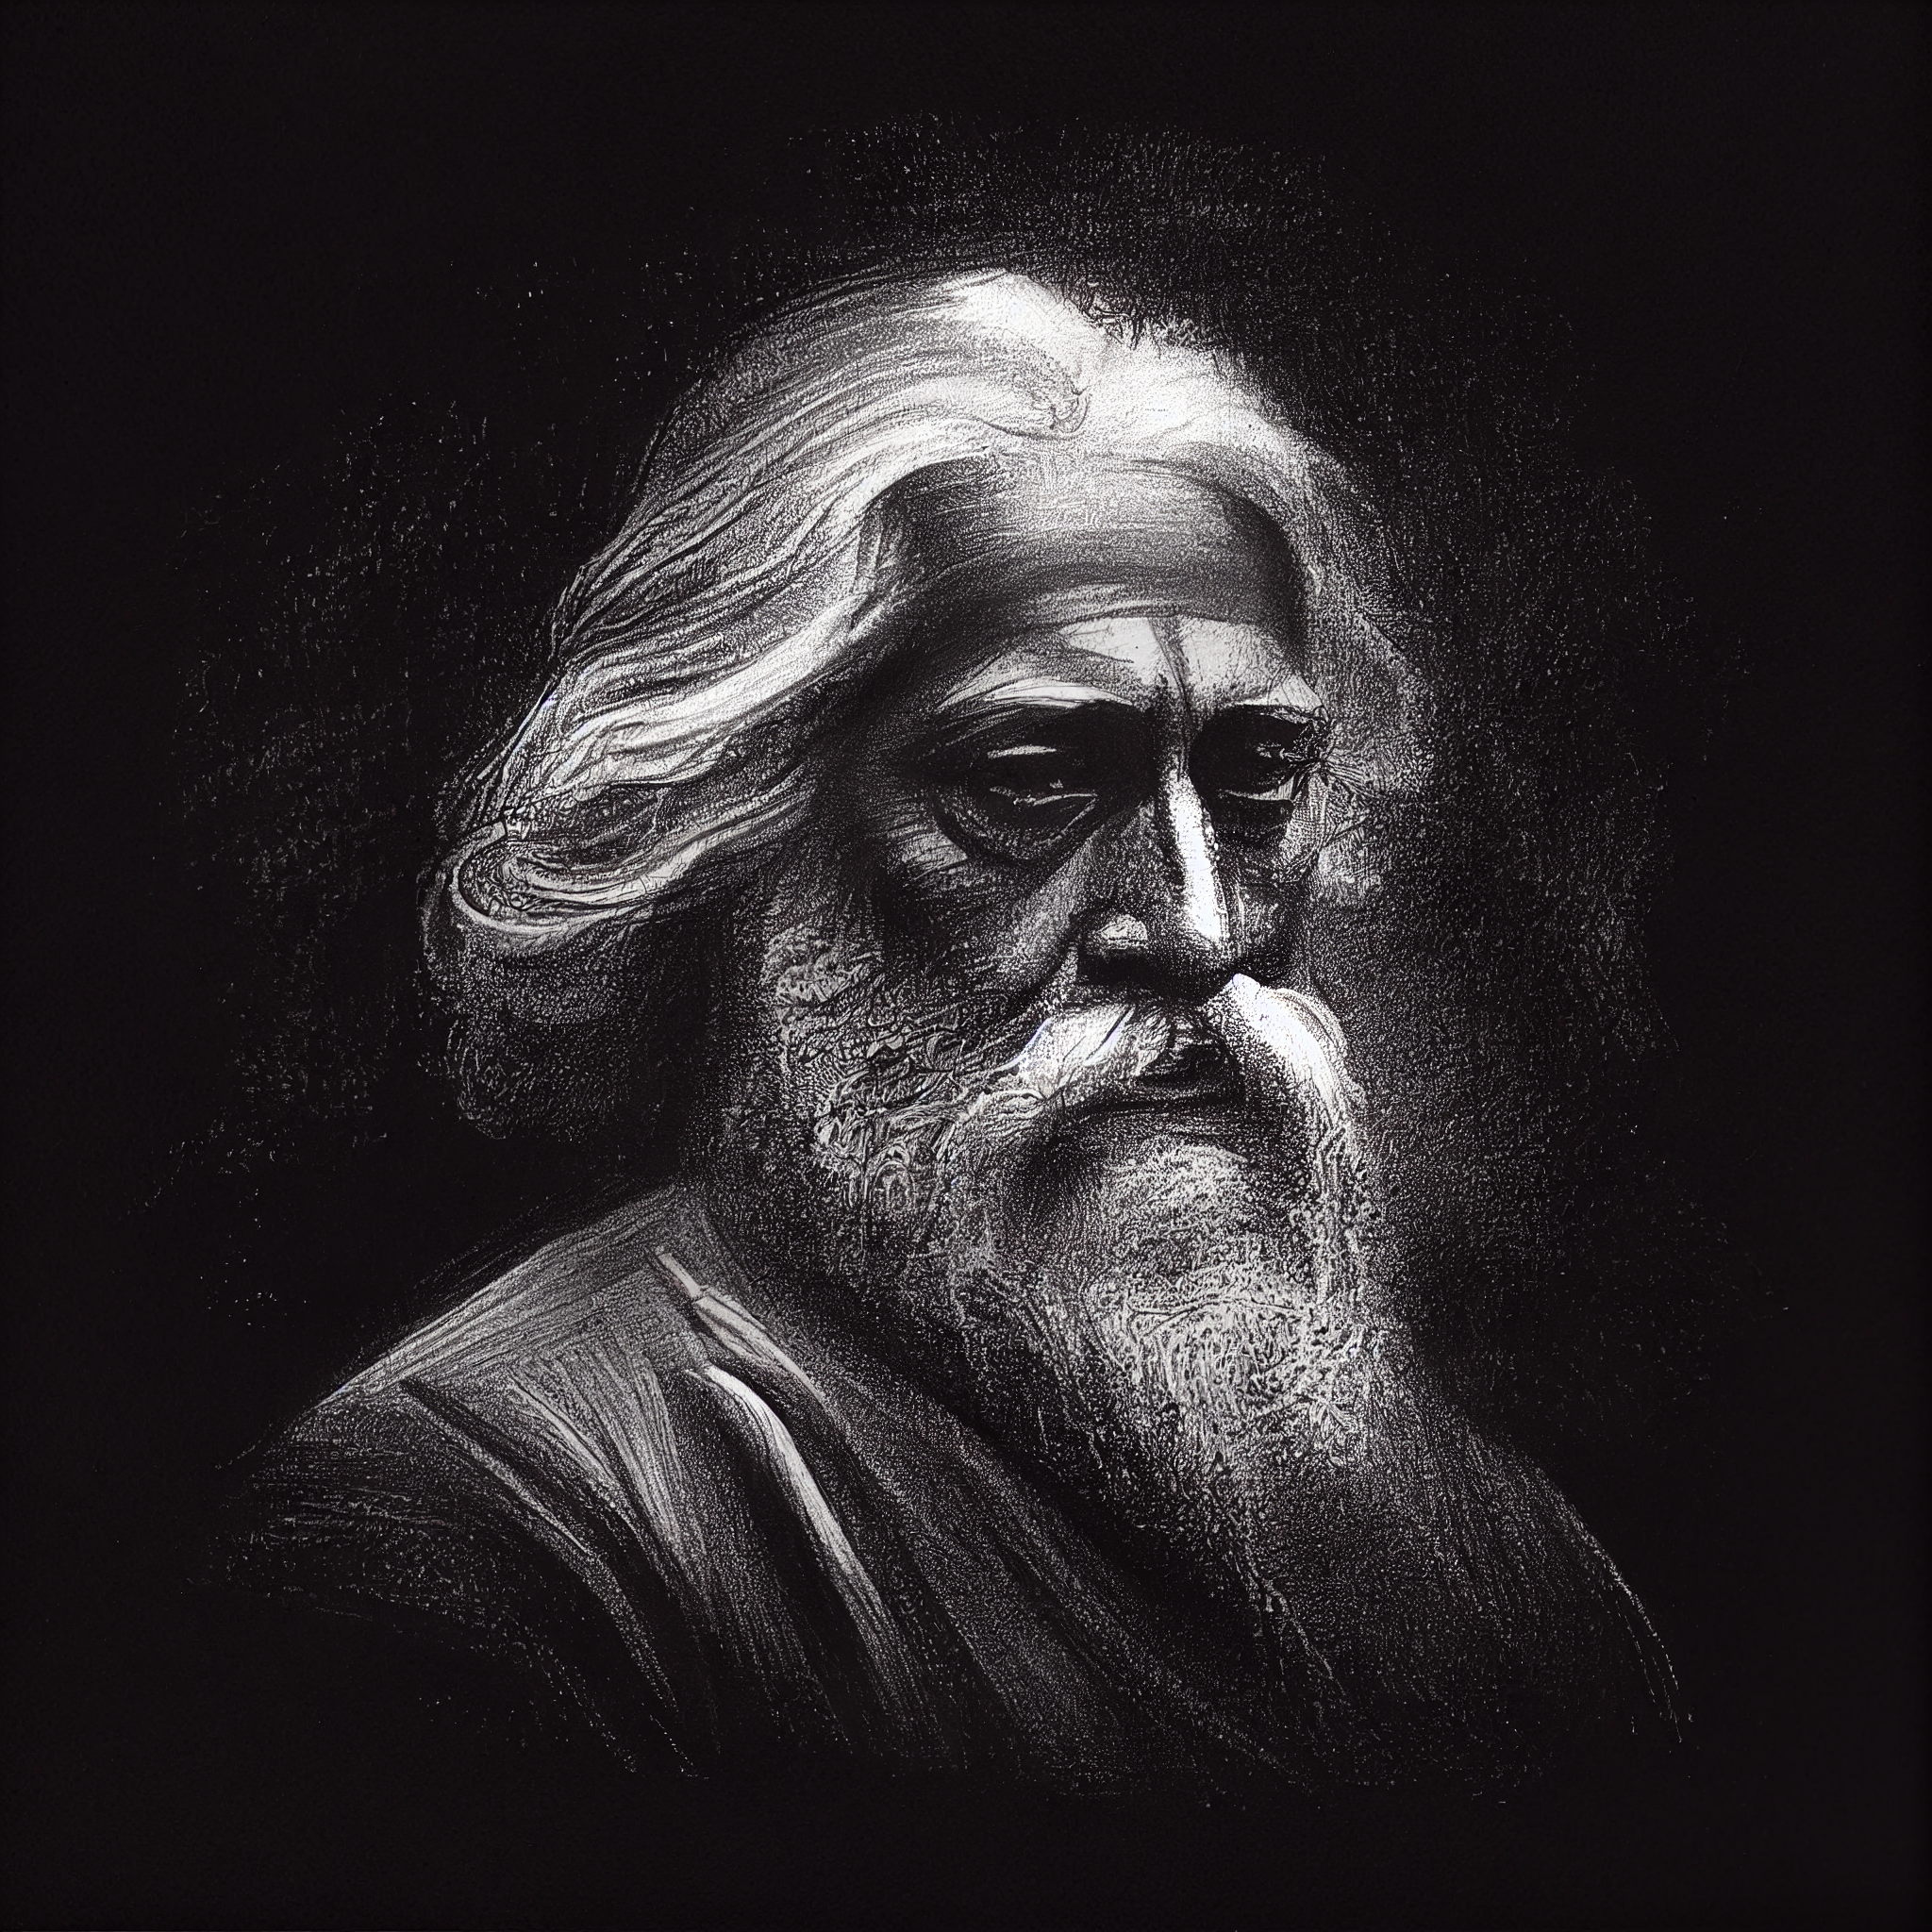 854 Rabindranath Tagore Images, Stock Photos, 3D objects, & Vectors |  Shutterstock